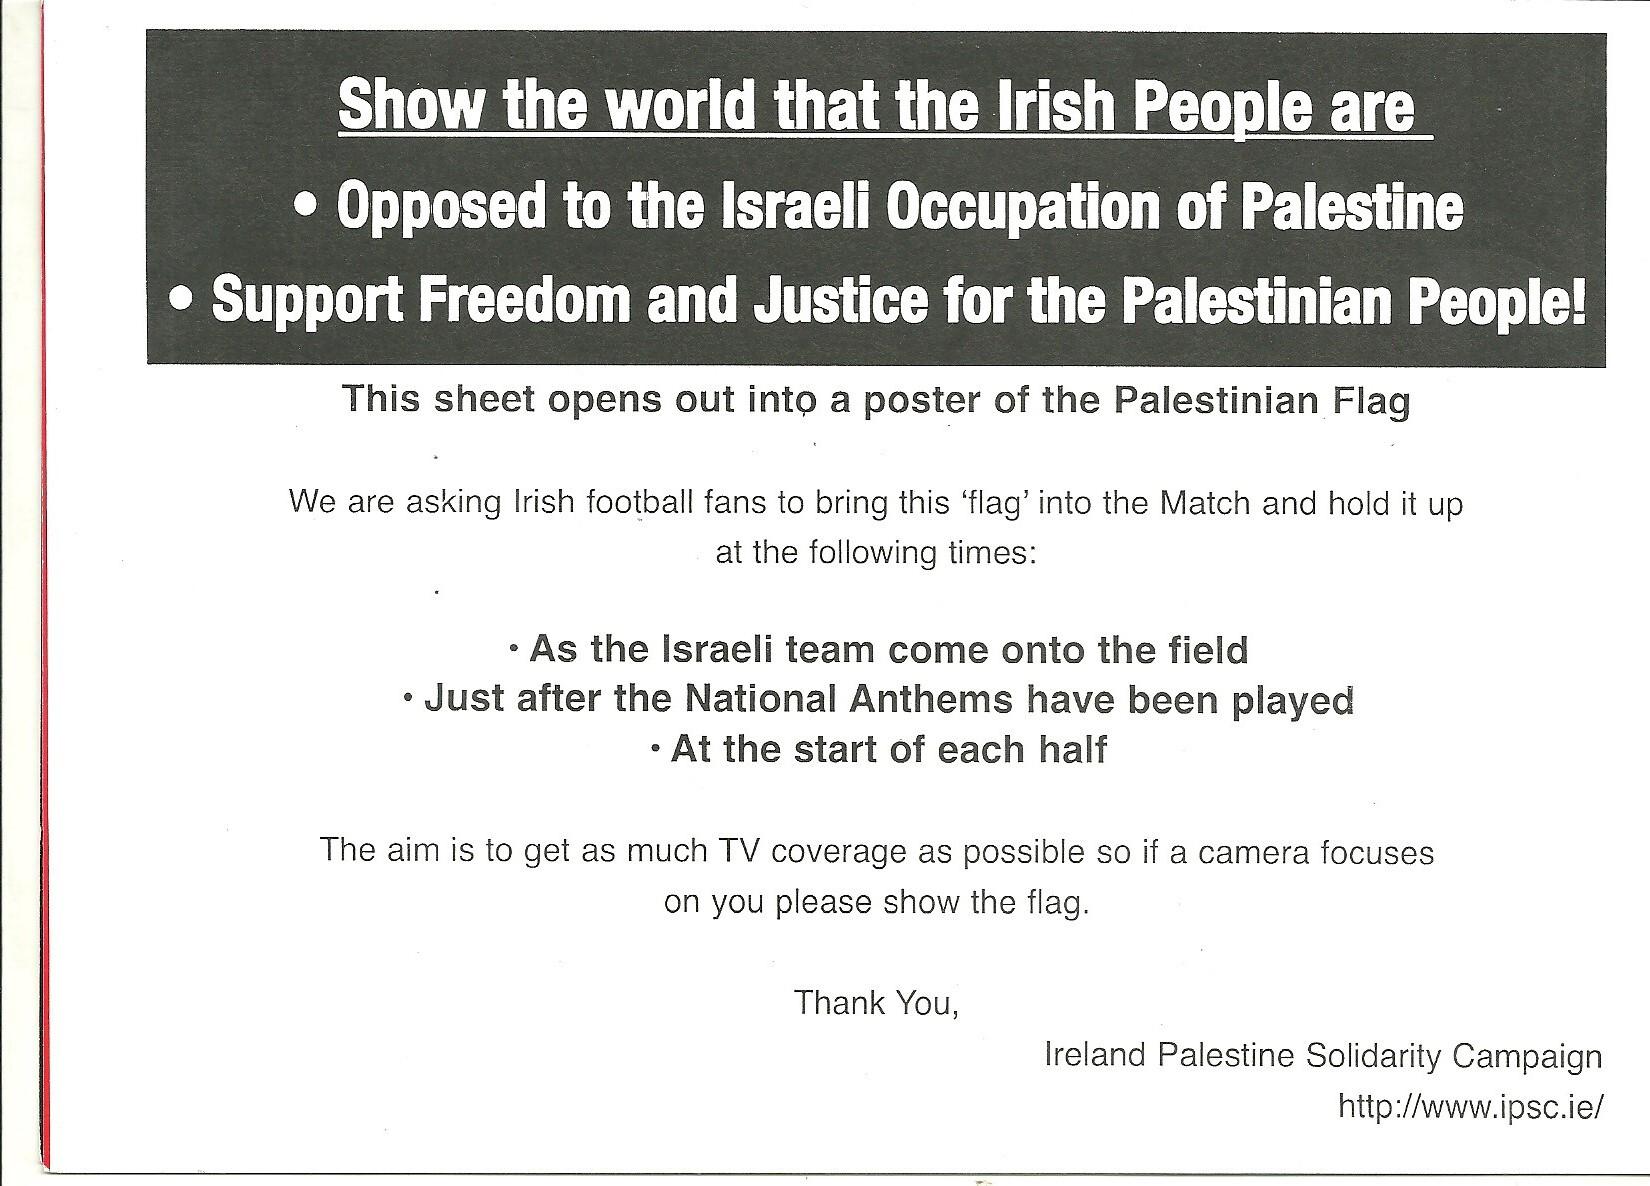 A leaflet reading: Show the world that the Irish People are

* Opposed to the Israeli Occupation of Palestine
* Support Freedom and Justice for the Palestinian People!

This sheet opens out into a poster of the Palestinian Flag

We are asking Irish football fans to bring this ‘flag’ into the Match and hold it up  at the following times:

* As the Israeli team come onto the field
* Just after the National Anthems have been played
* At the start of each half

The aim is to get as much TV coverage as possible so if a camera focuses on you please show the flag.

Thank You,
Ireland Palestine Solidarity Campaign
http://www.ipsc.ie/

